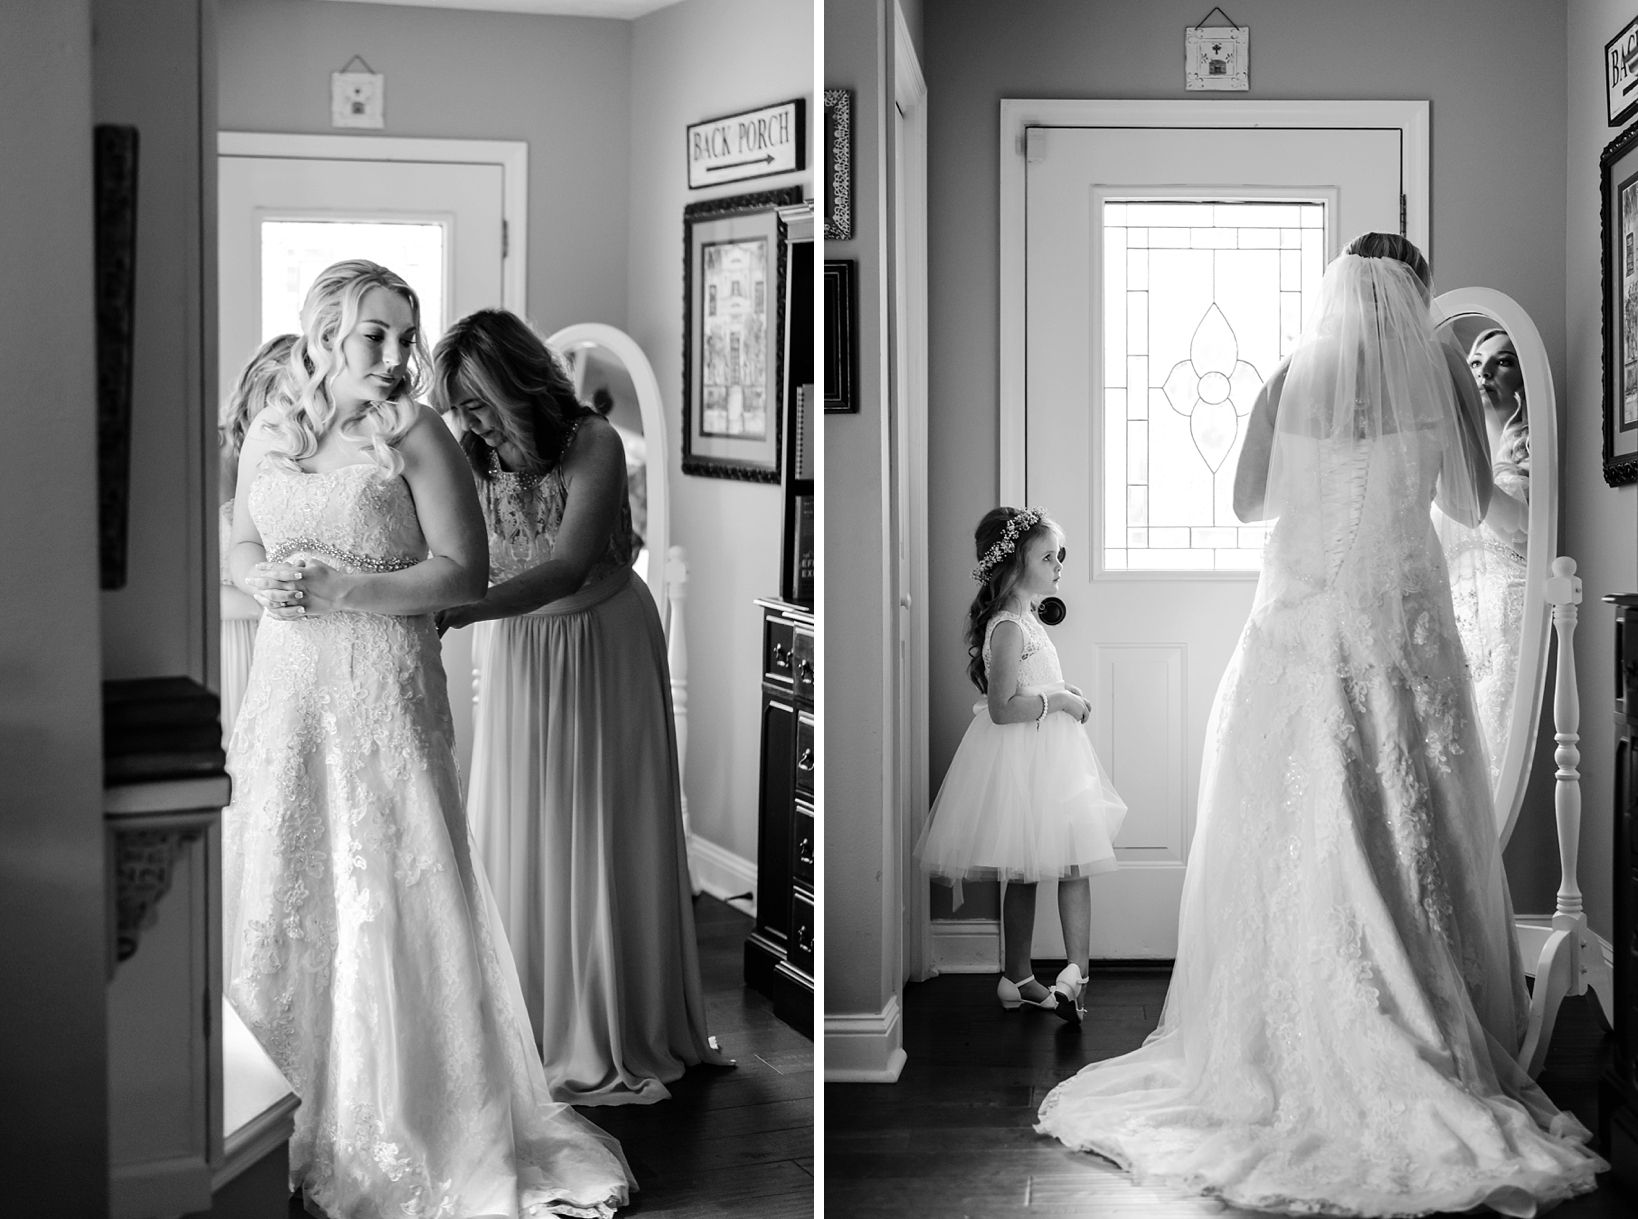 Black and white photos of the bride with her bridesmaids and flower girl